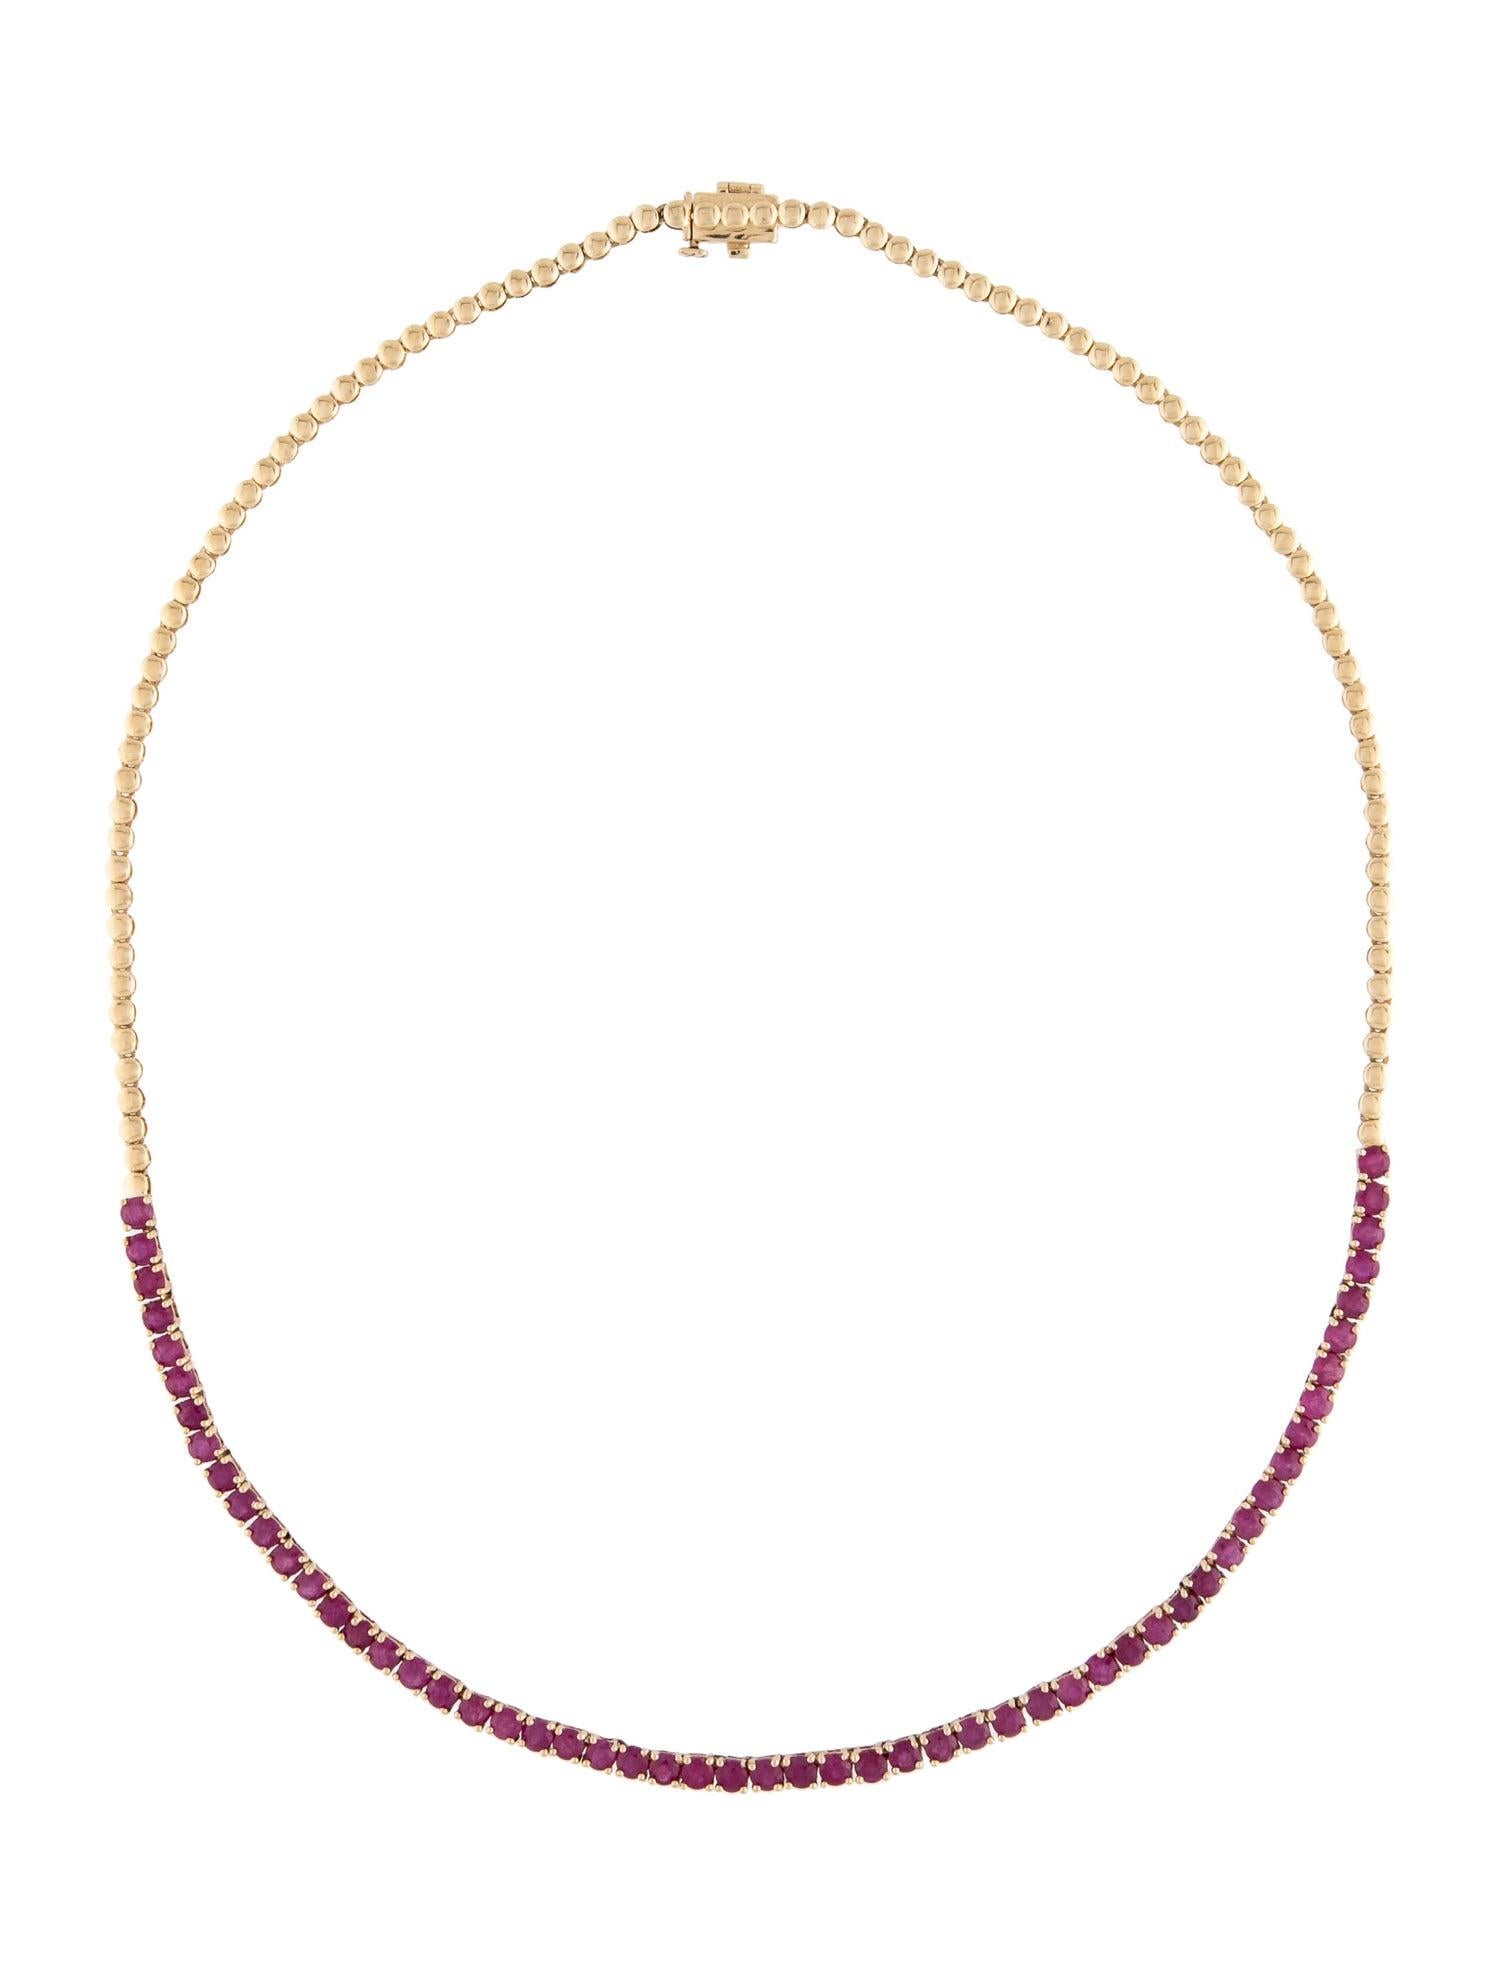 Luxury 14K 10.17ctw Ruby Collar Necklace - Exquisite Gemstone Statement Piece In New Condition For Sale In Holtsville, NY